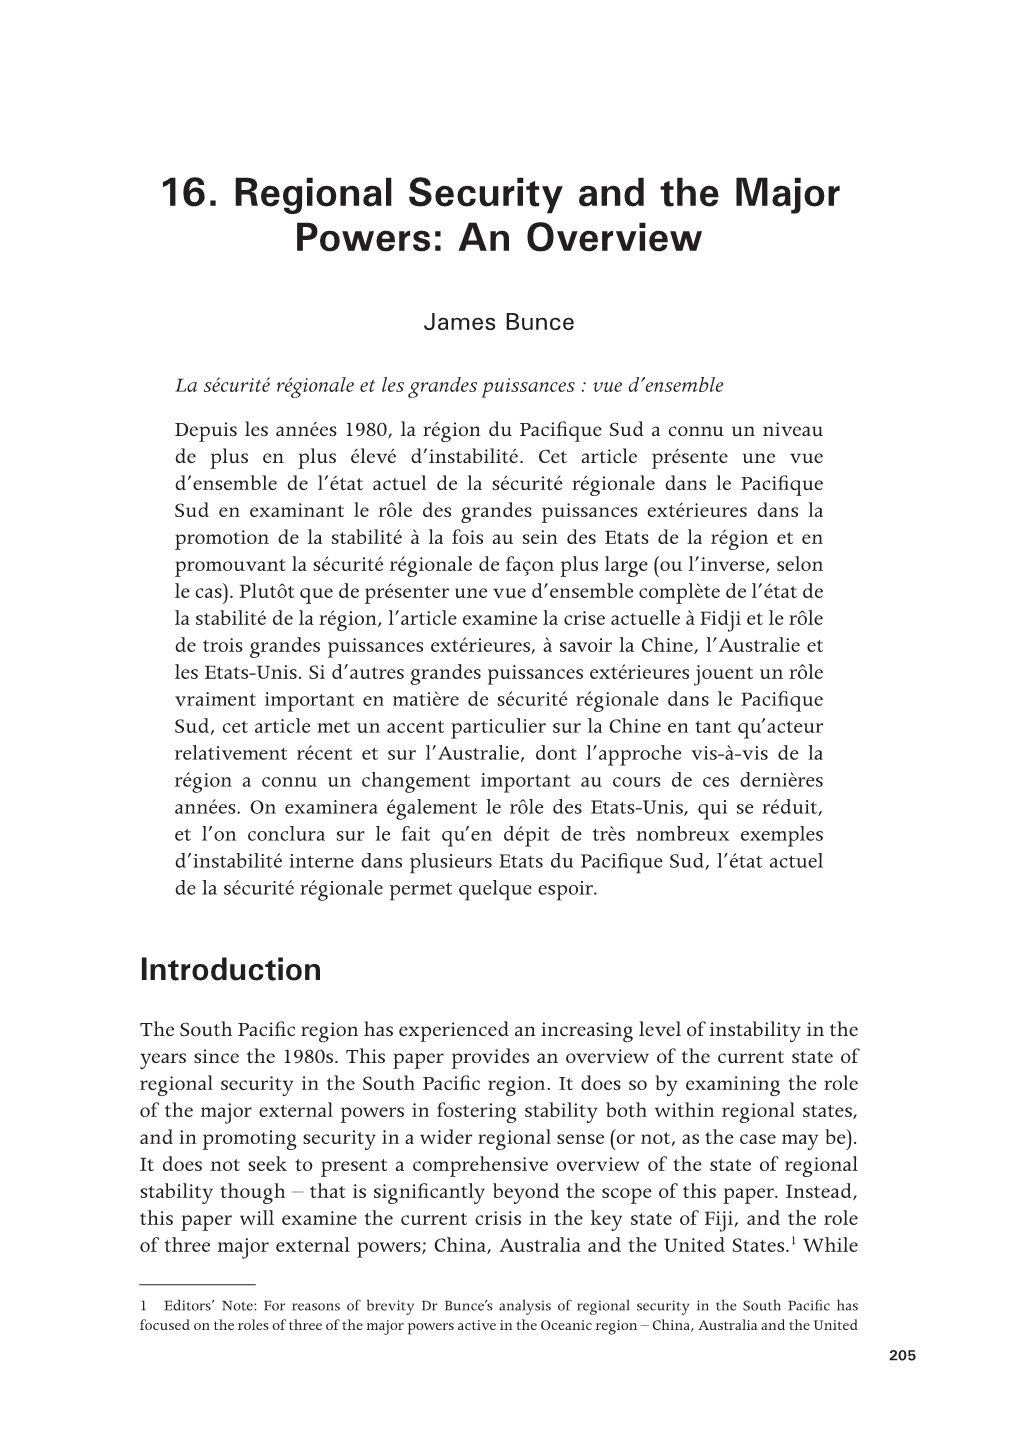 16. Regional Security and the Major Powers: an Overview